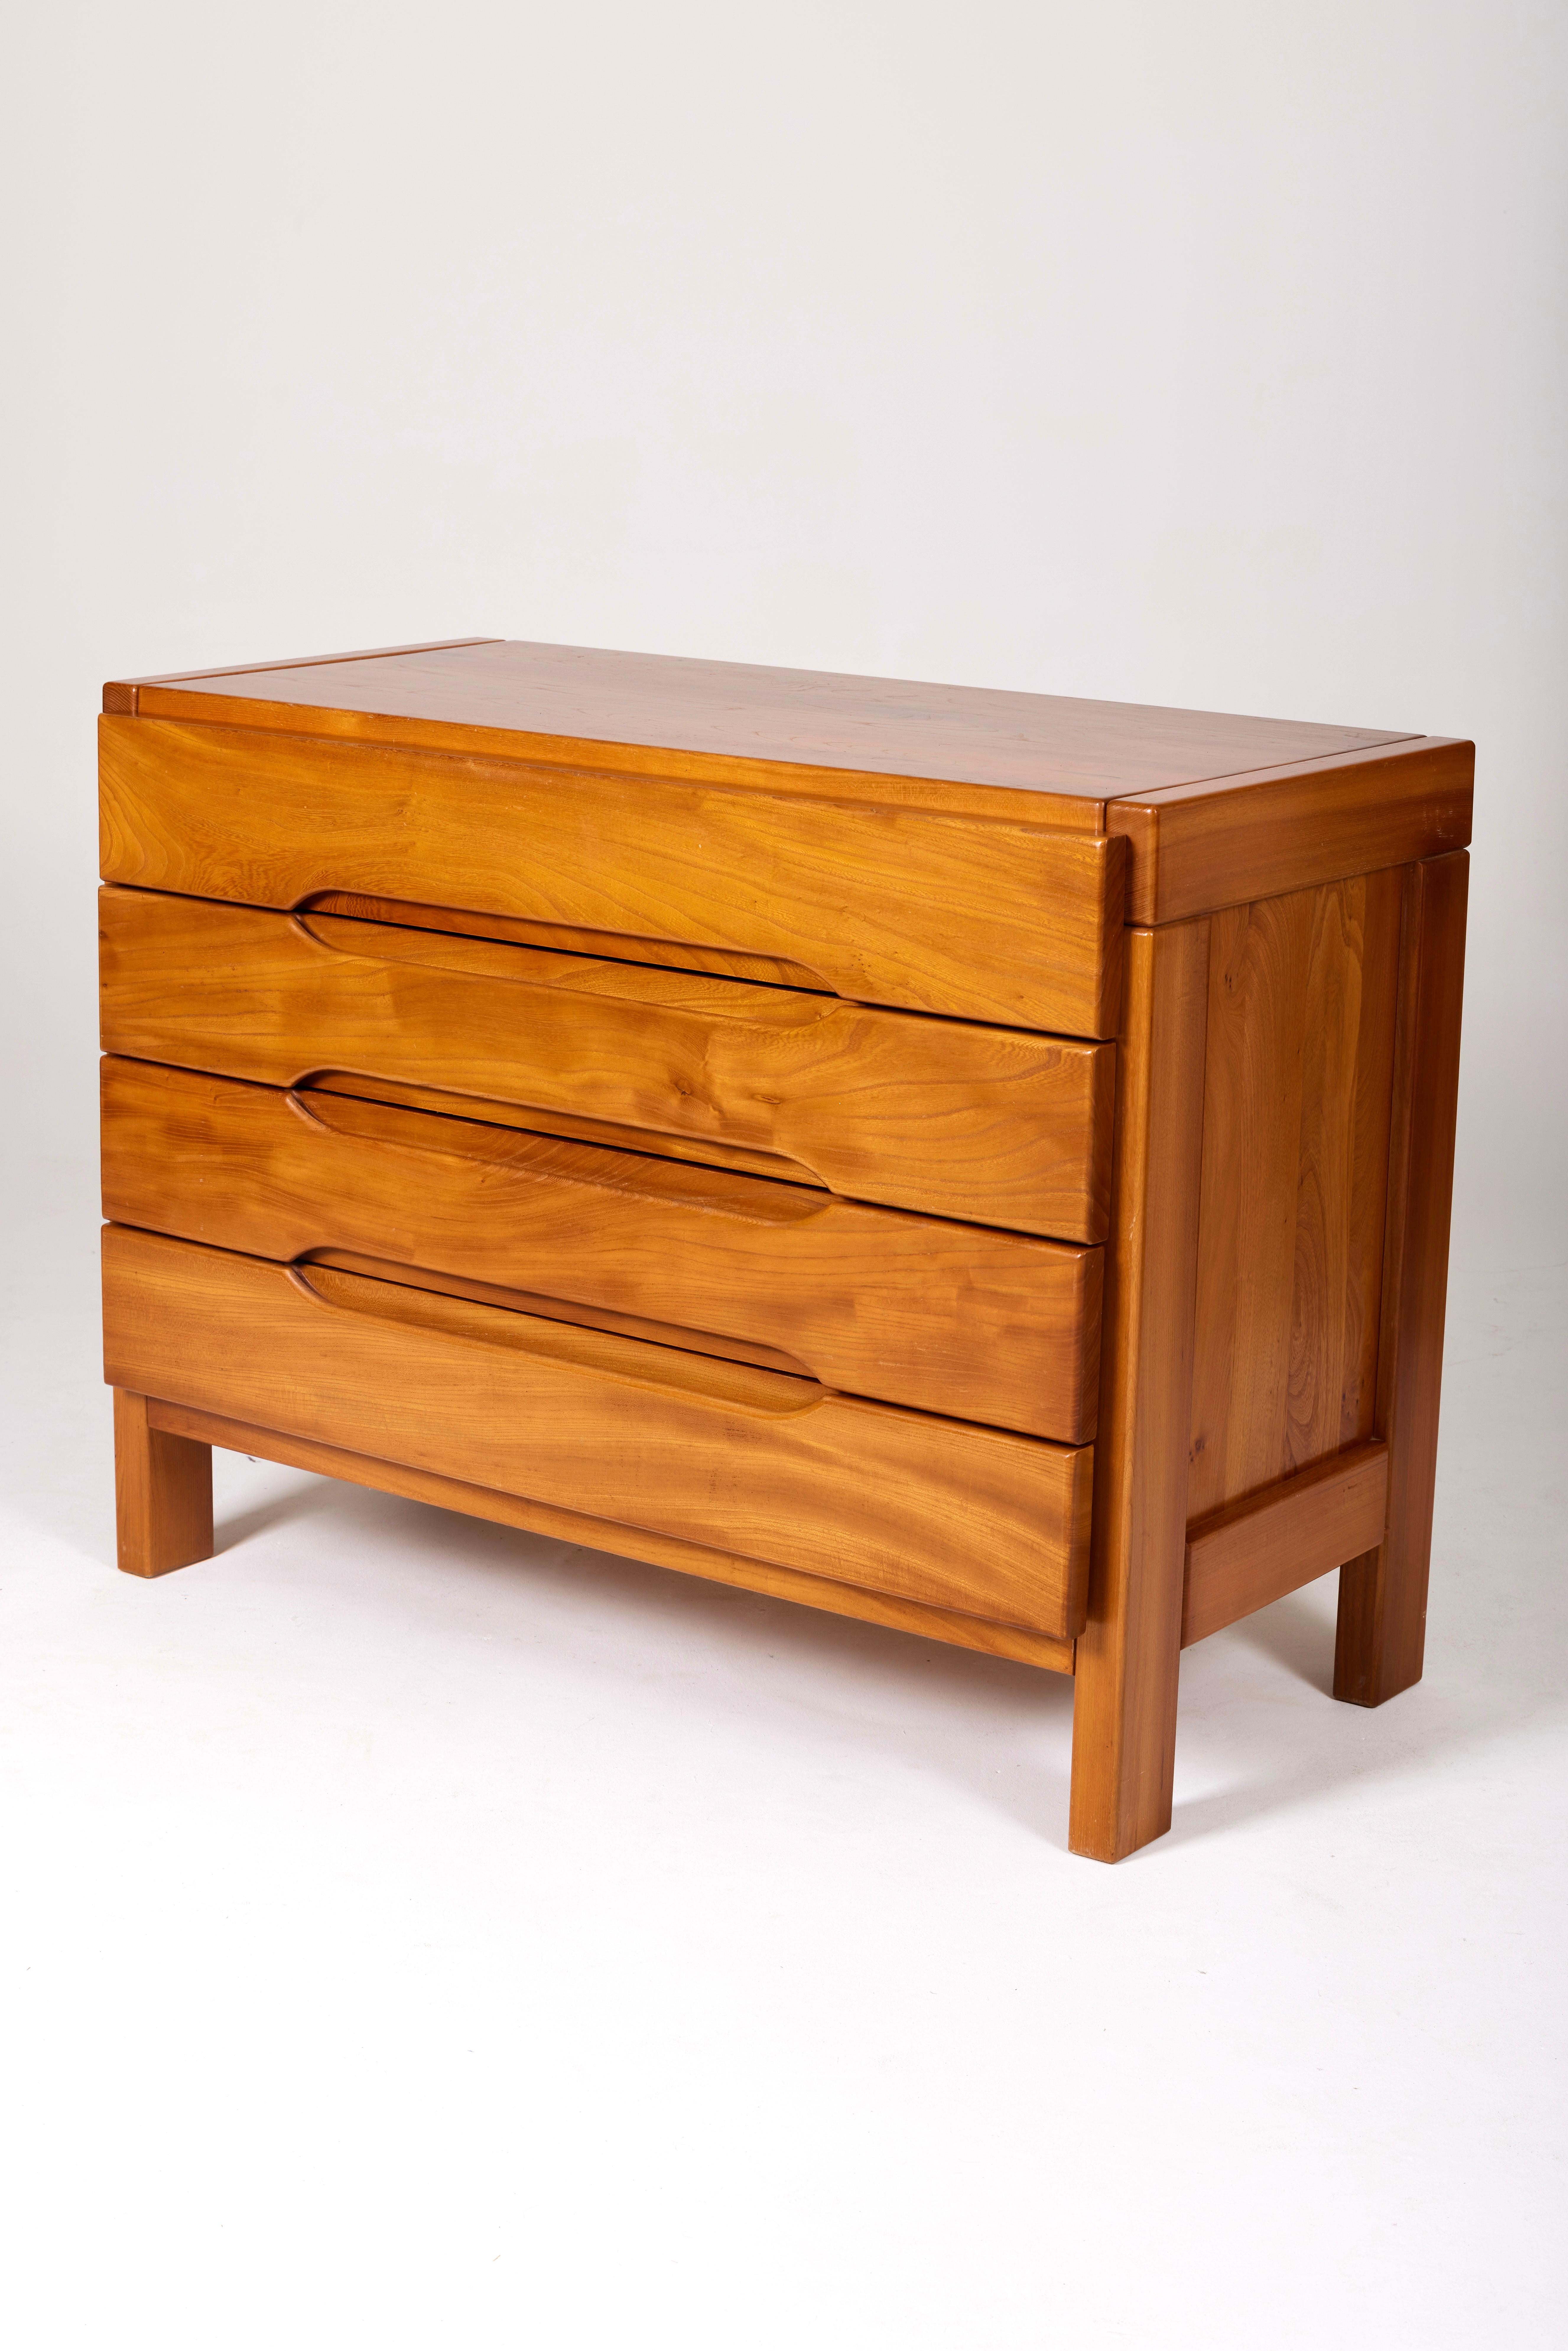 Elmwood dresser from Maison Regain, dating from the 1960s. The dresser has 4 drawers and can be paired with furniture by Pierre Chapo, Charlotte Perriand, or Christian Durupt. In very good condition.
LP1181